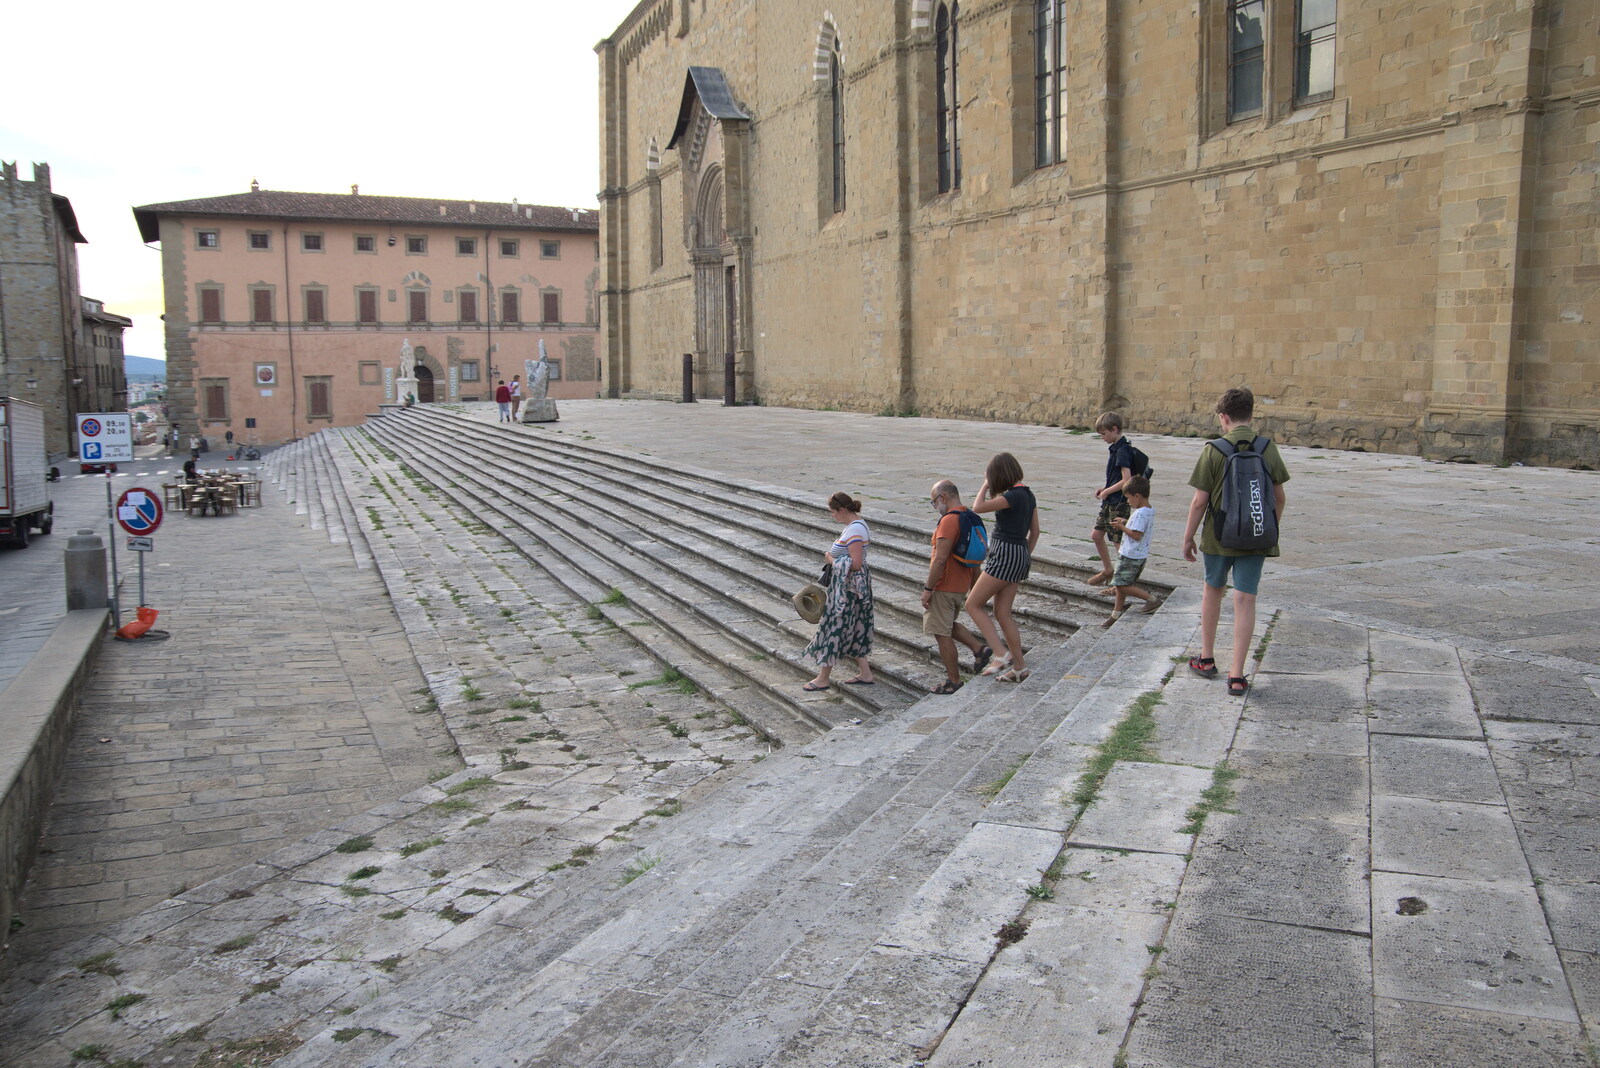 A Day by the Pool and a Festival Rehearsal, Arezzo, Italy - 3rd September 2022: On the steps of Arezzo's cathedral